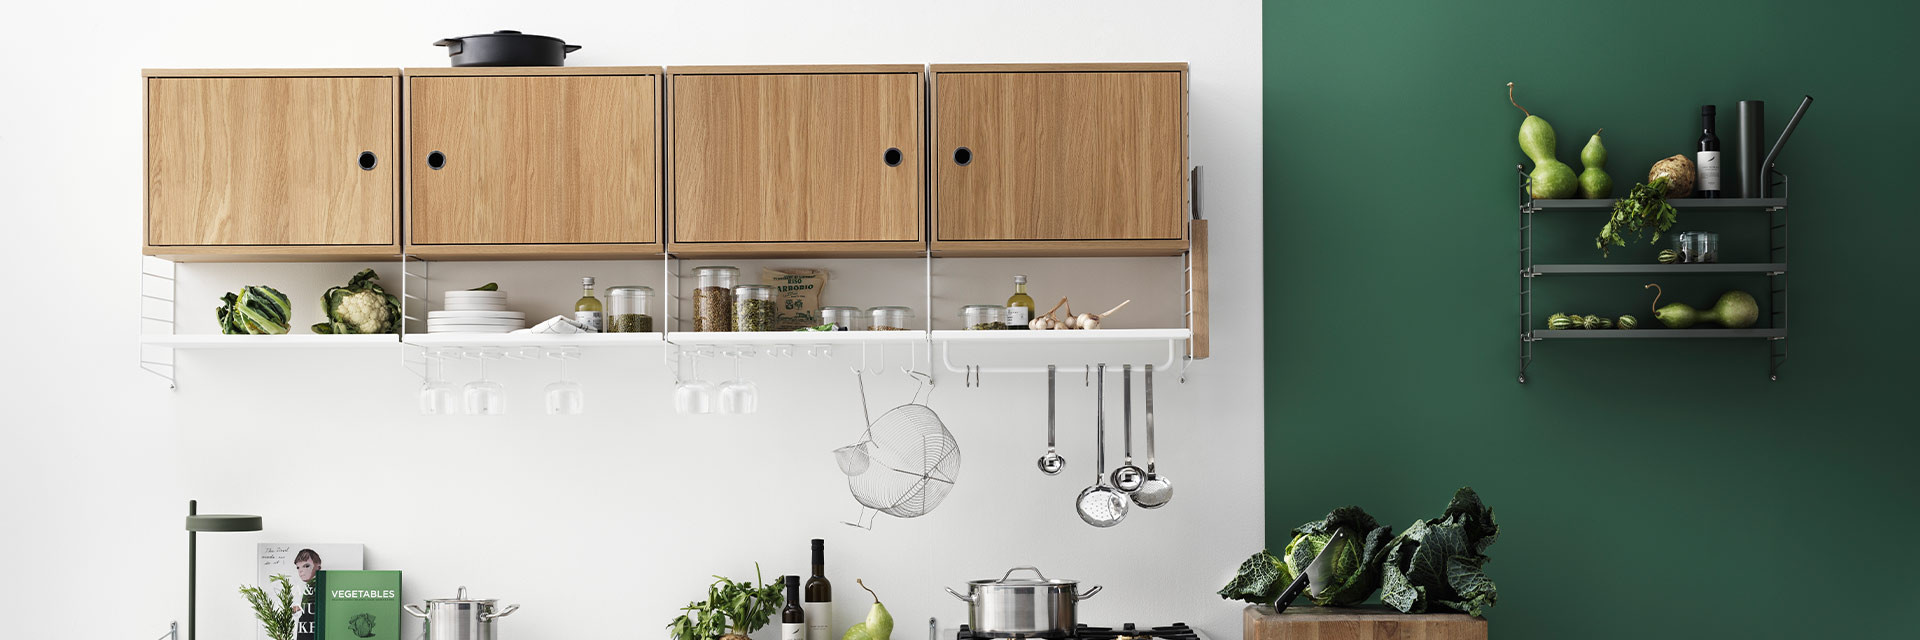 Scandinavian design furniture, lighting and decorative items for kitchens